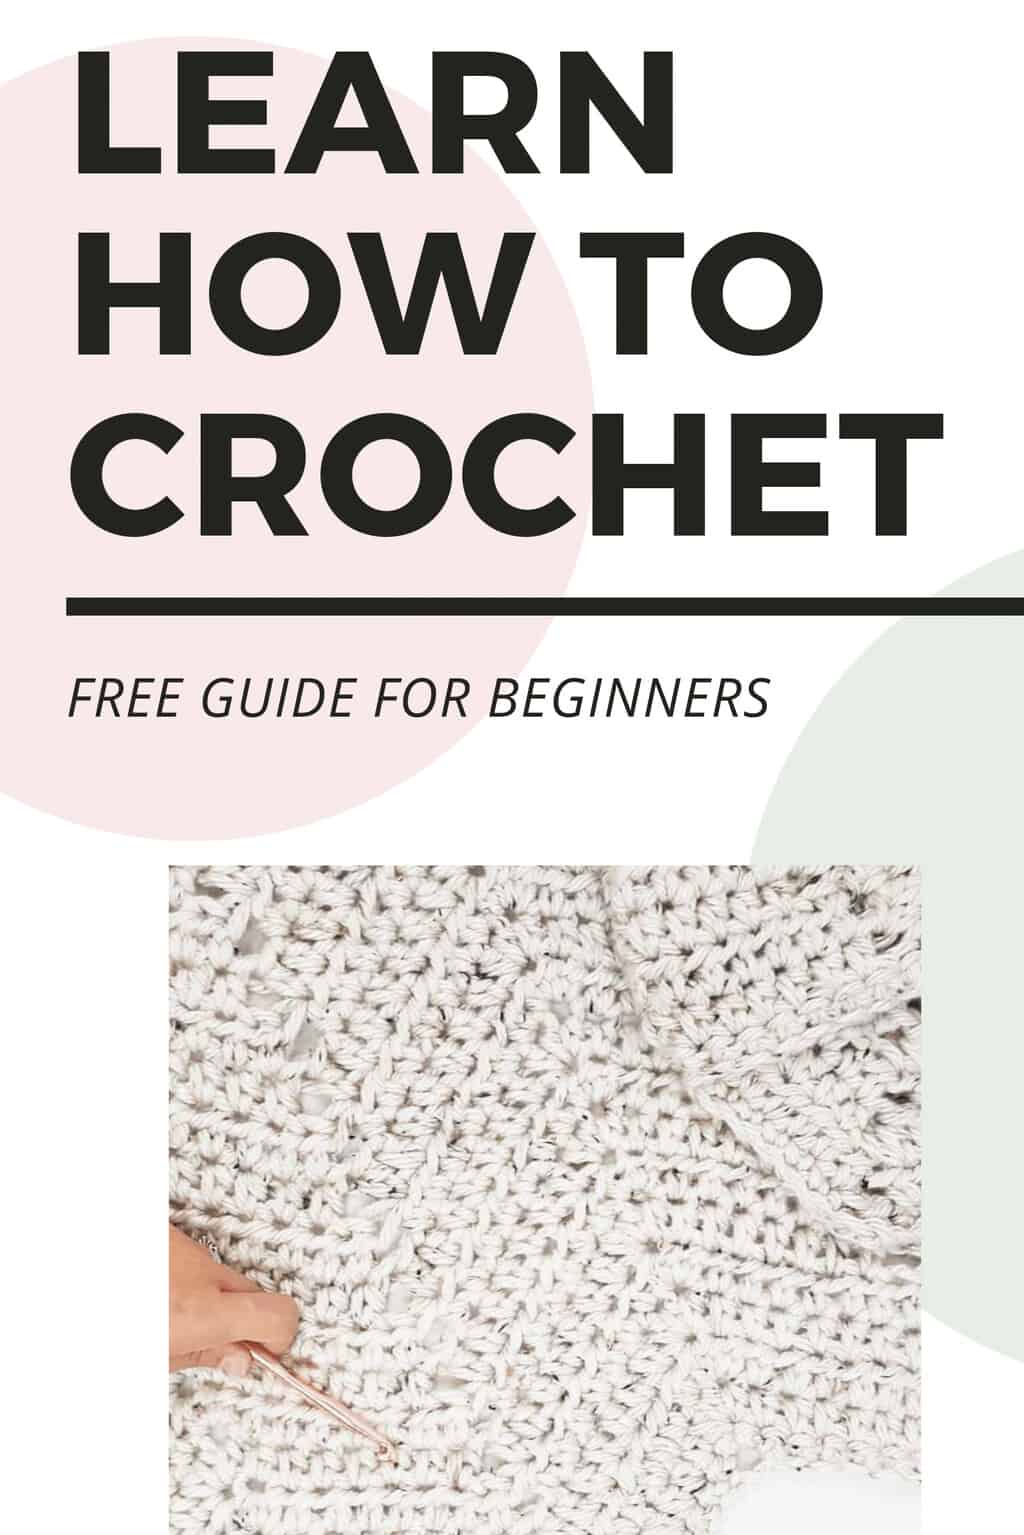 Learn how to crochet tutorial and resource 